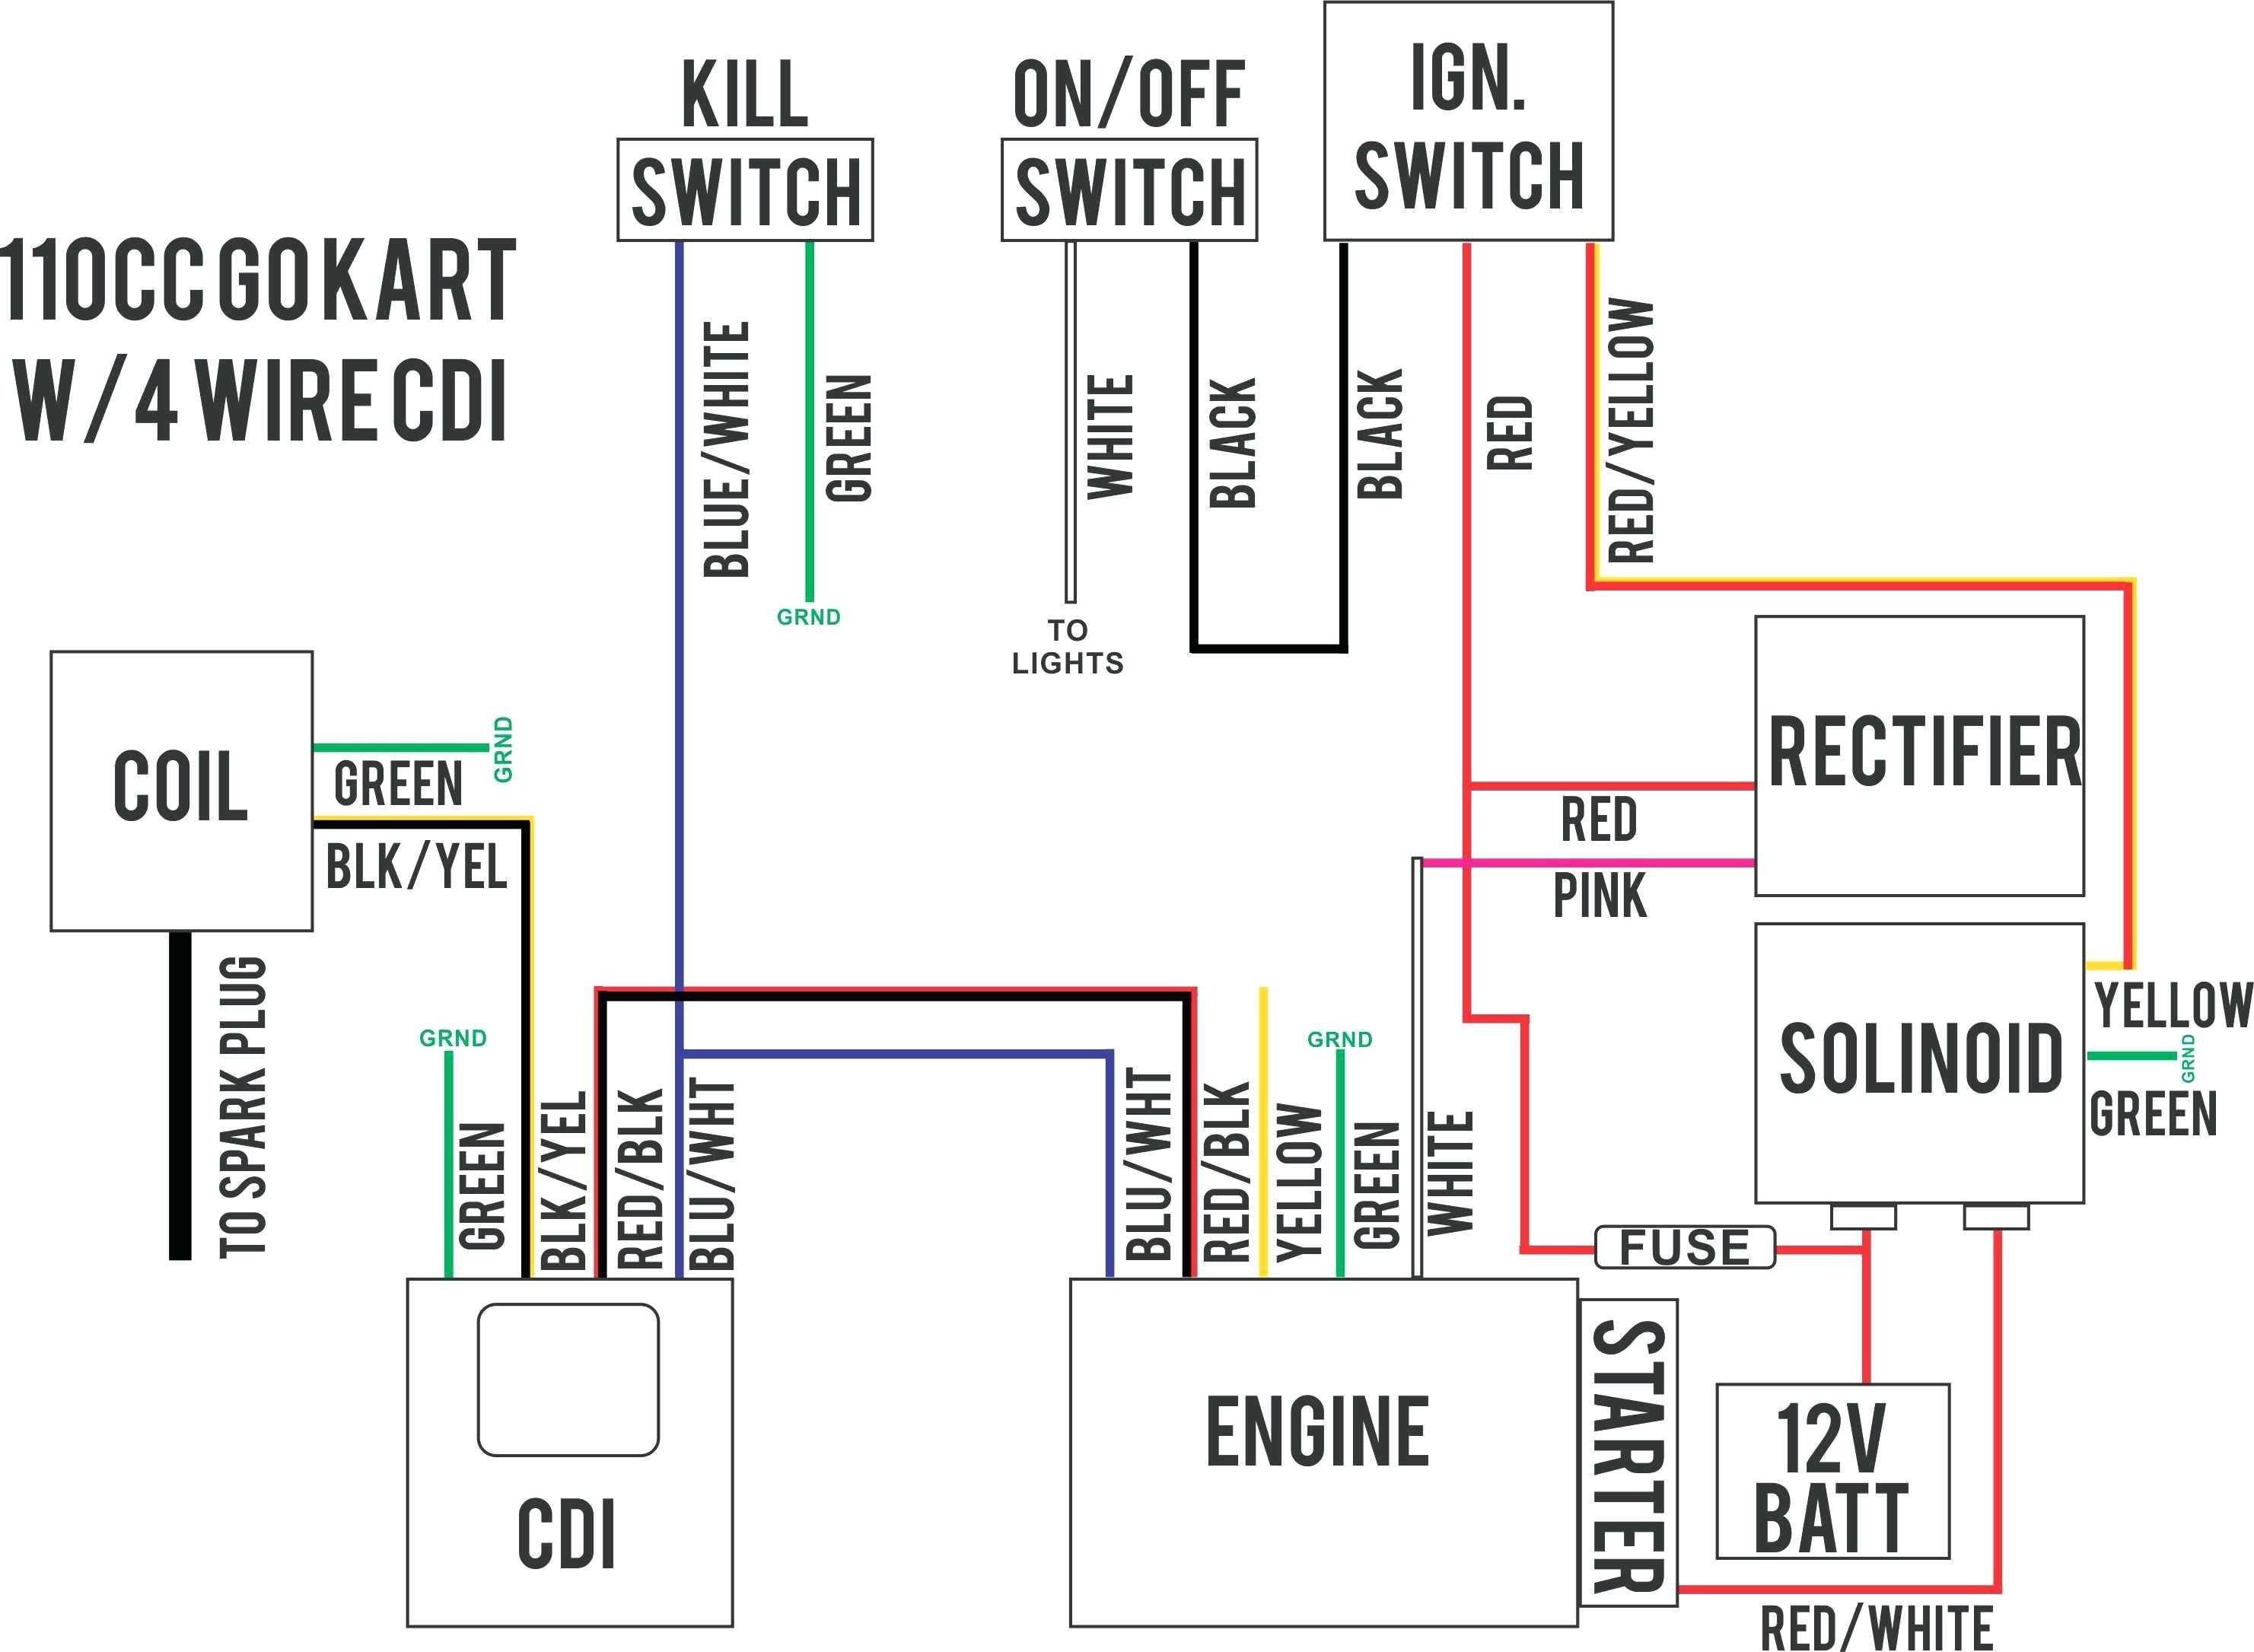 Rectifier Circuit Diagram Awesome Excellent 4 Pin Cdi Wiring Diagram Ideas Electrical Circuit